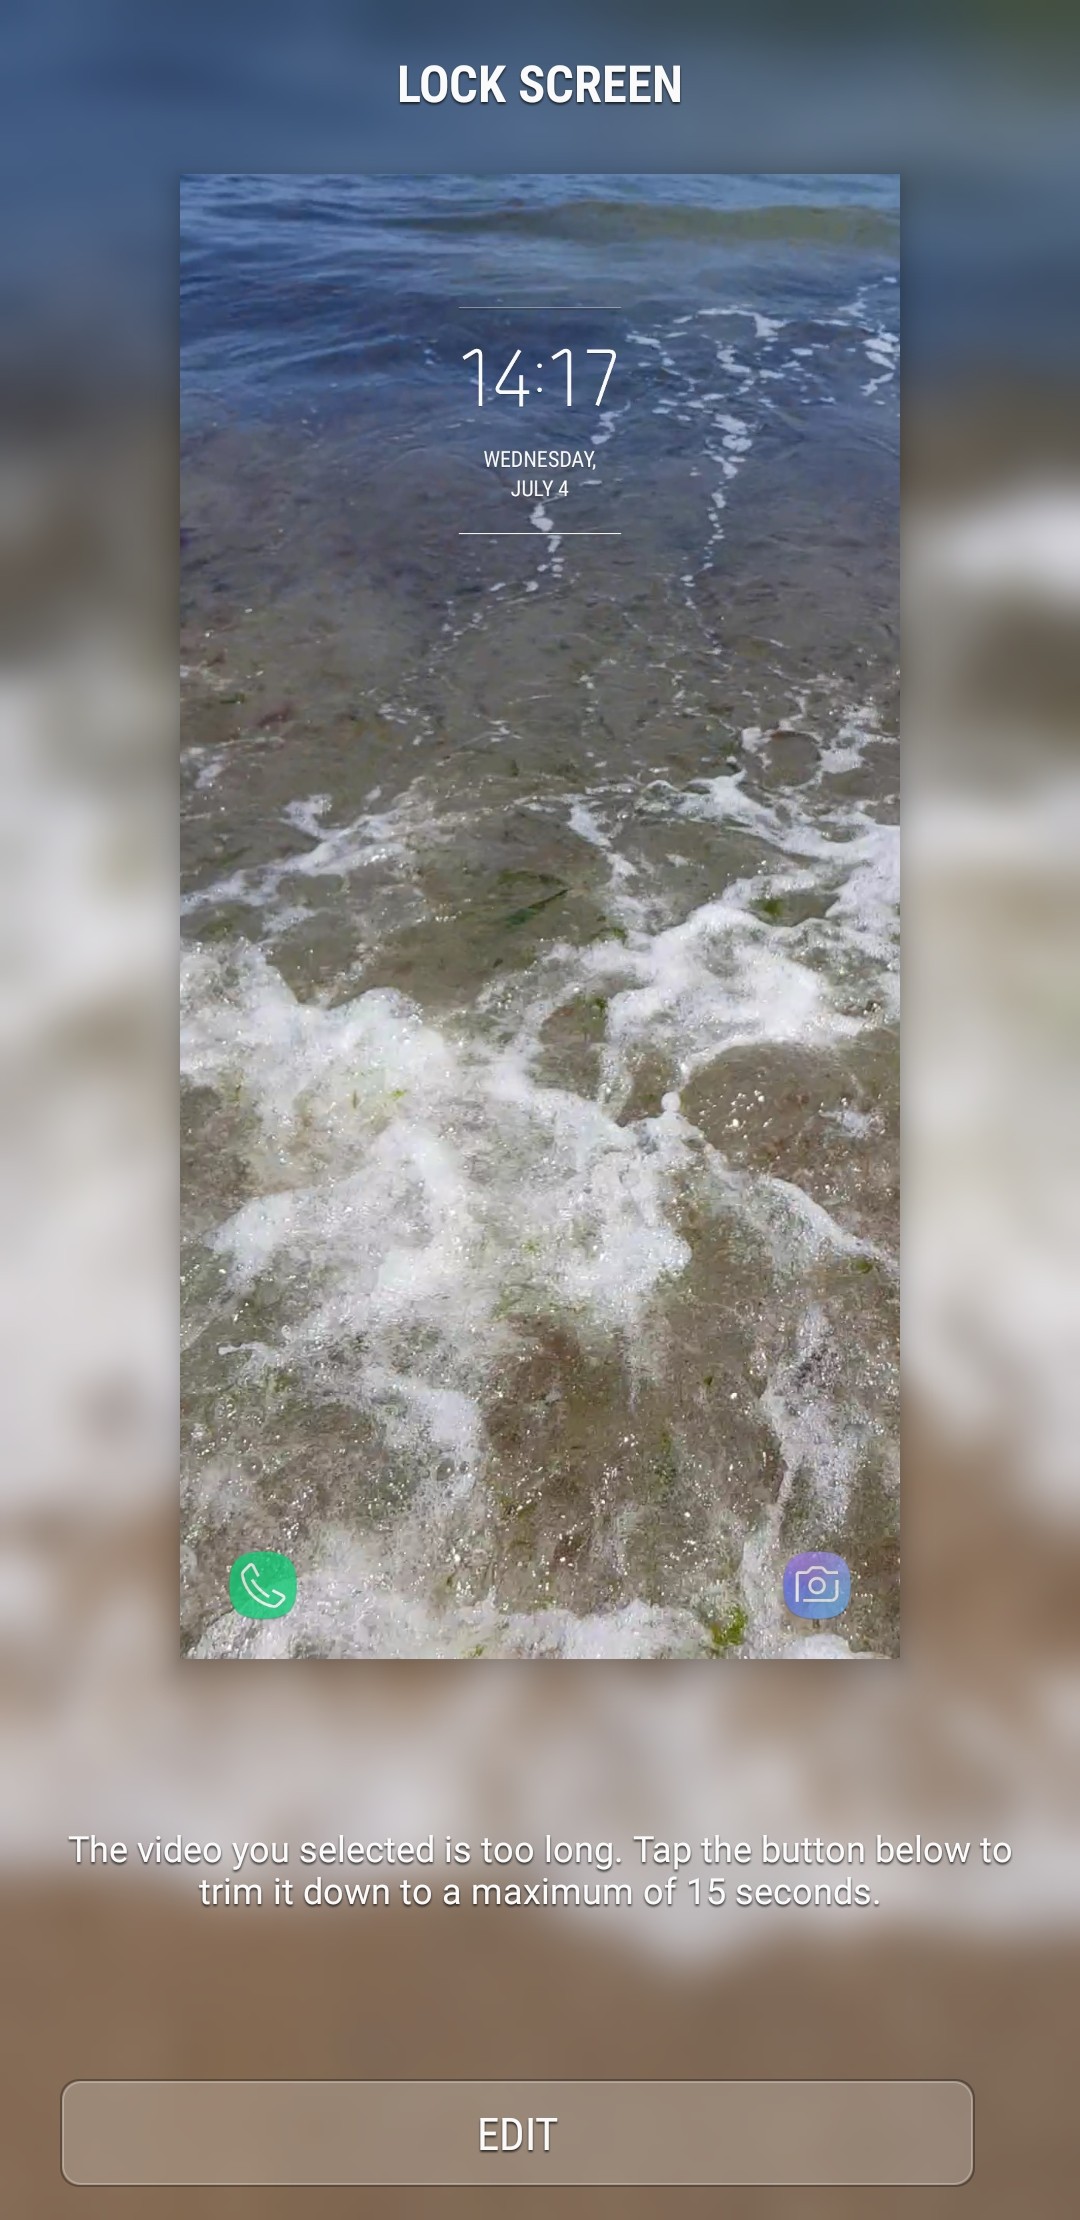 How To Set A Video As Lock Screen Wallpaper On Samsung Galaxy S8